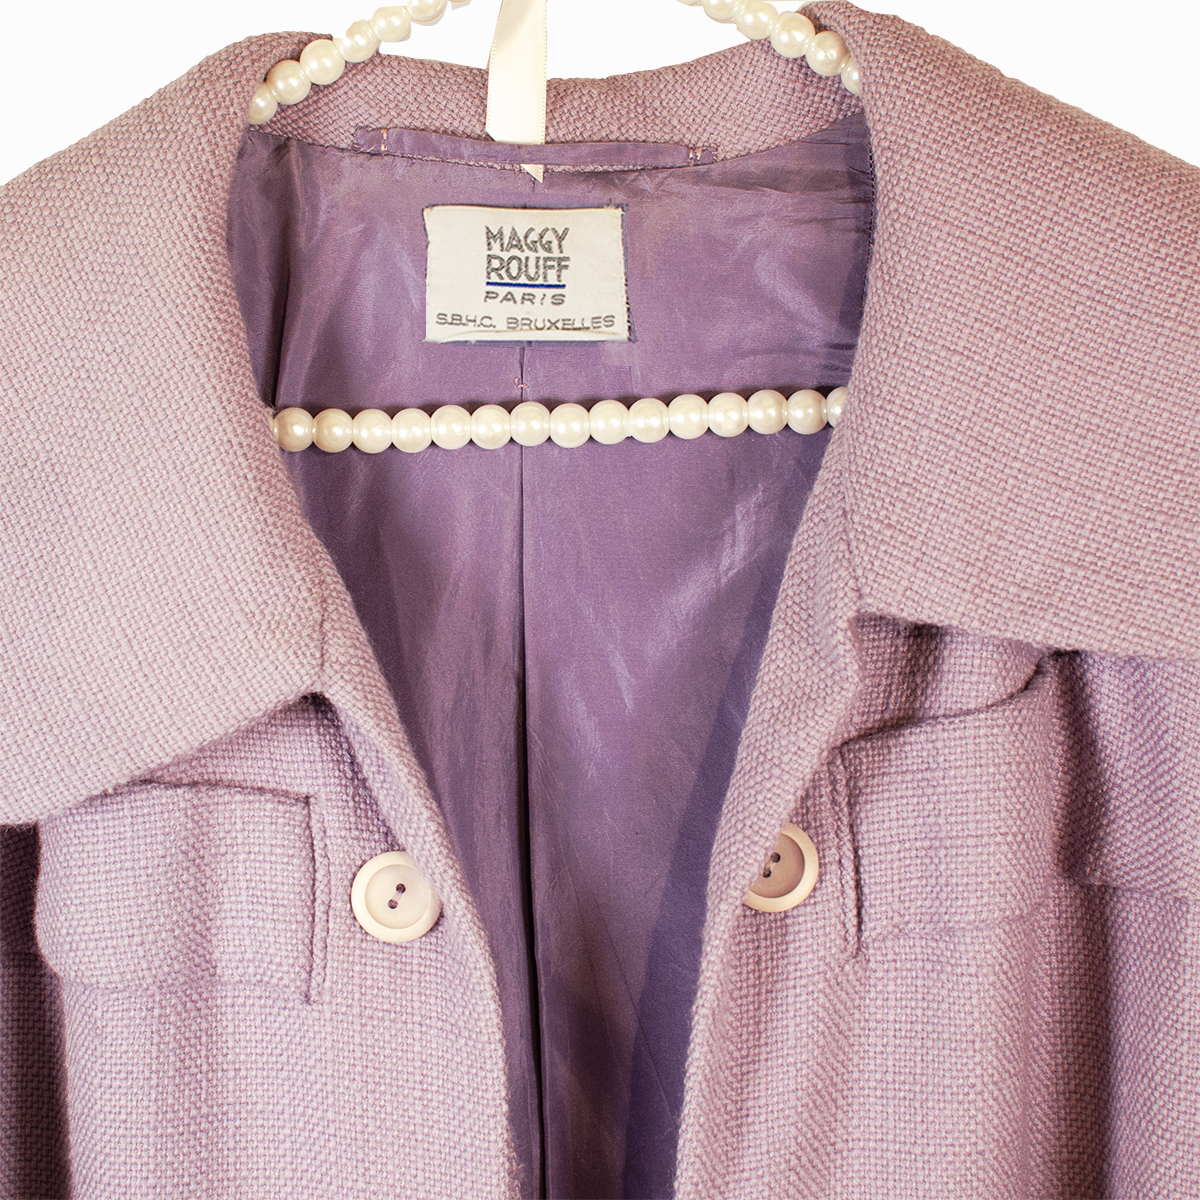 Maggy rouff 1960s label